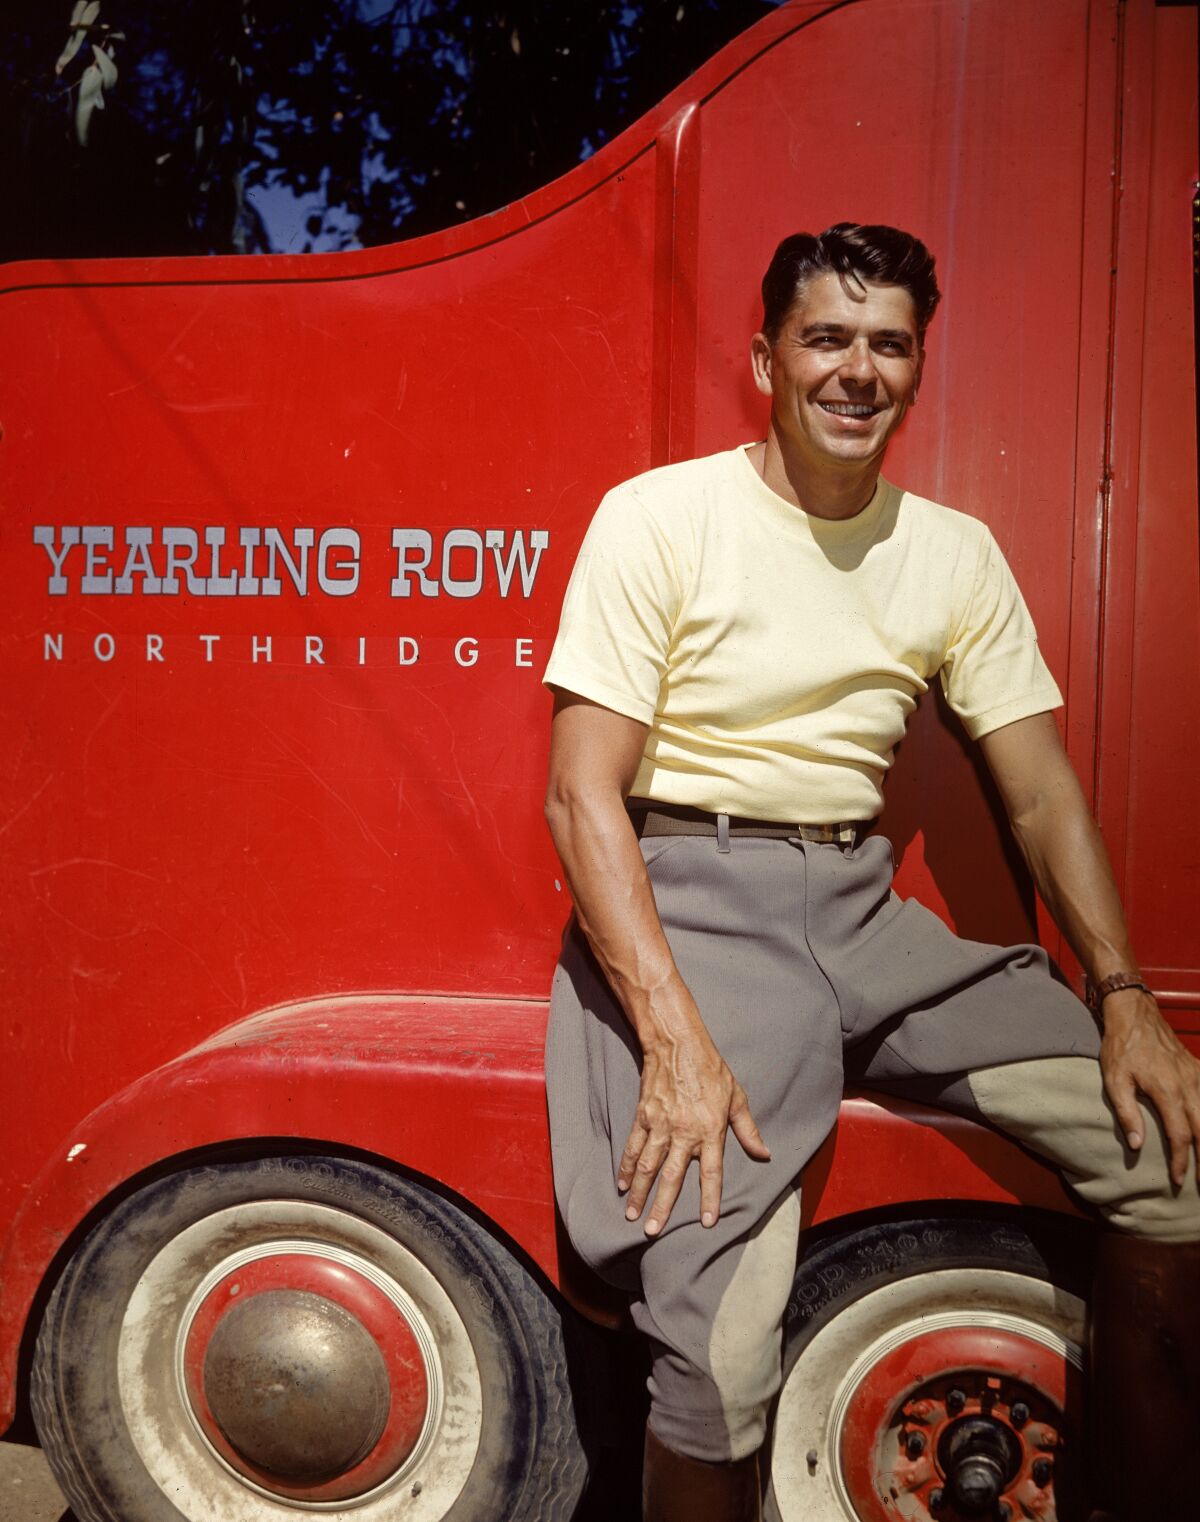 Ronald Reagan, wearing jodhpurs and riding boots, poses in front of a red trailer at the Yearling Row Ranch in Northridge, circa 1960.